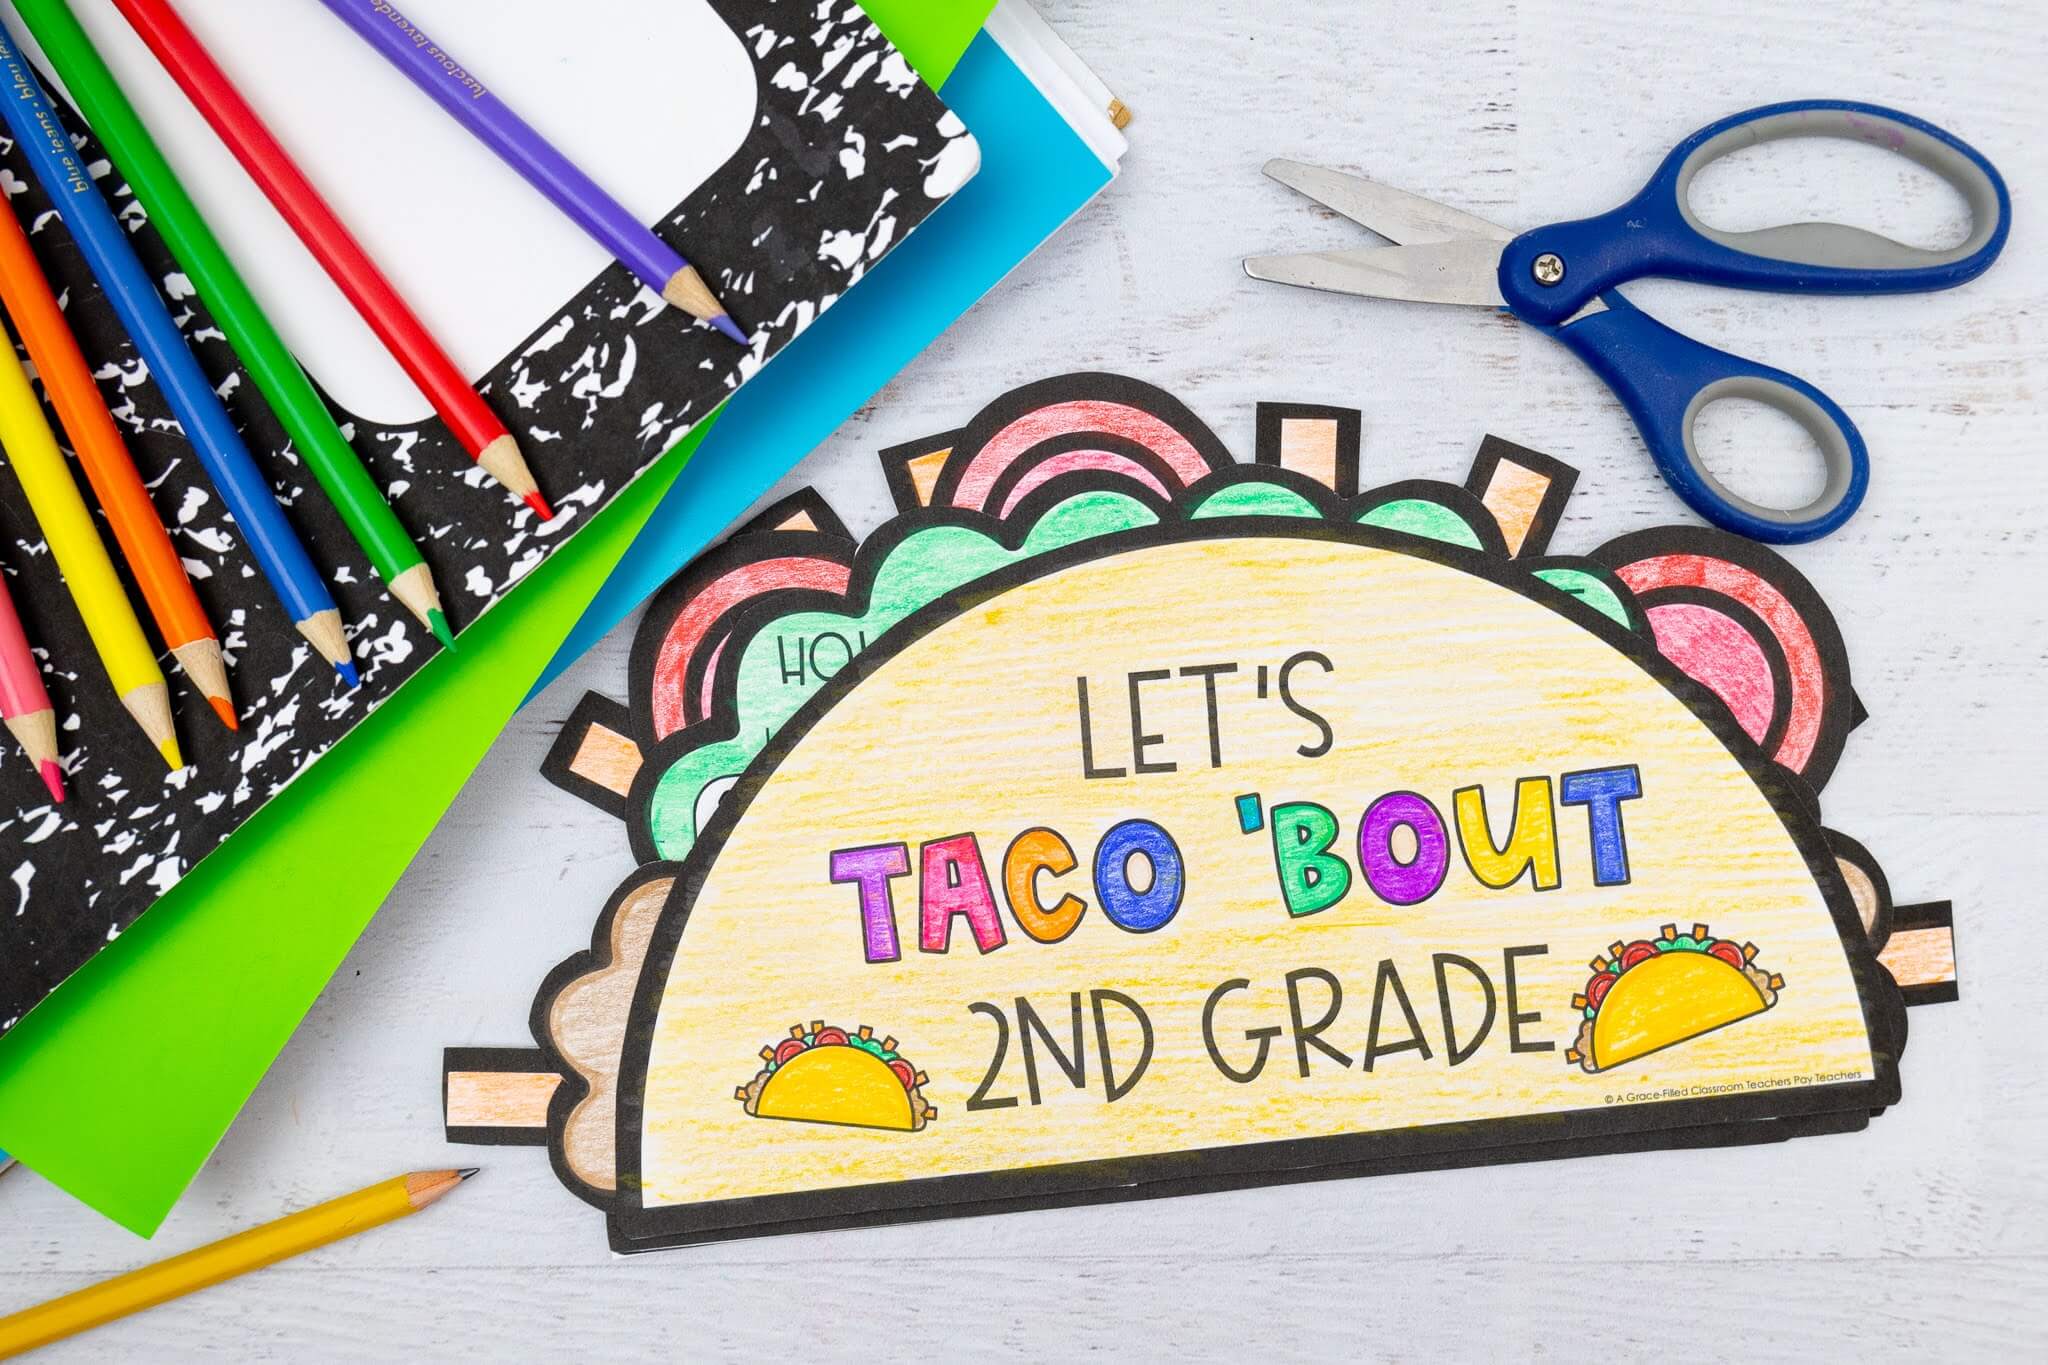 taco shell with the title Let's Taco 'bout 2nd Grade